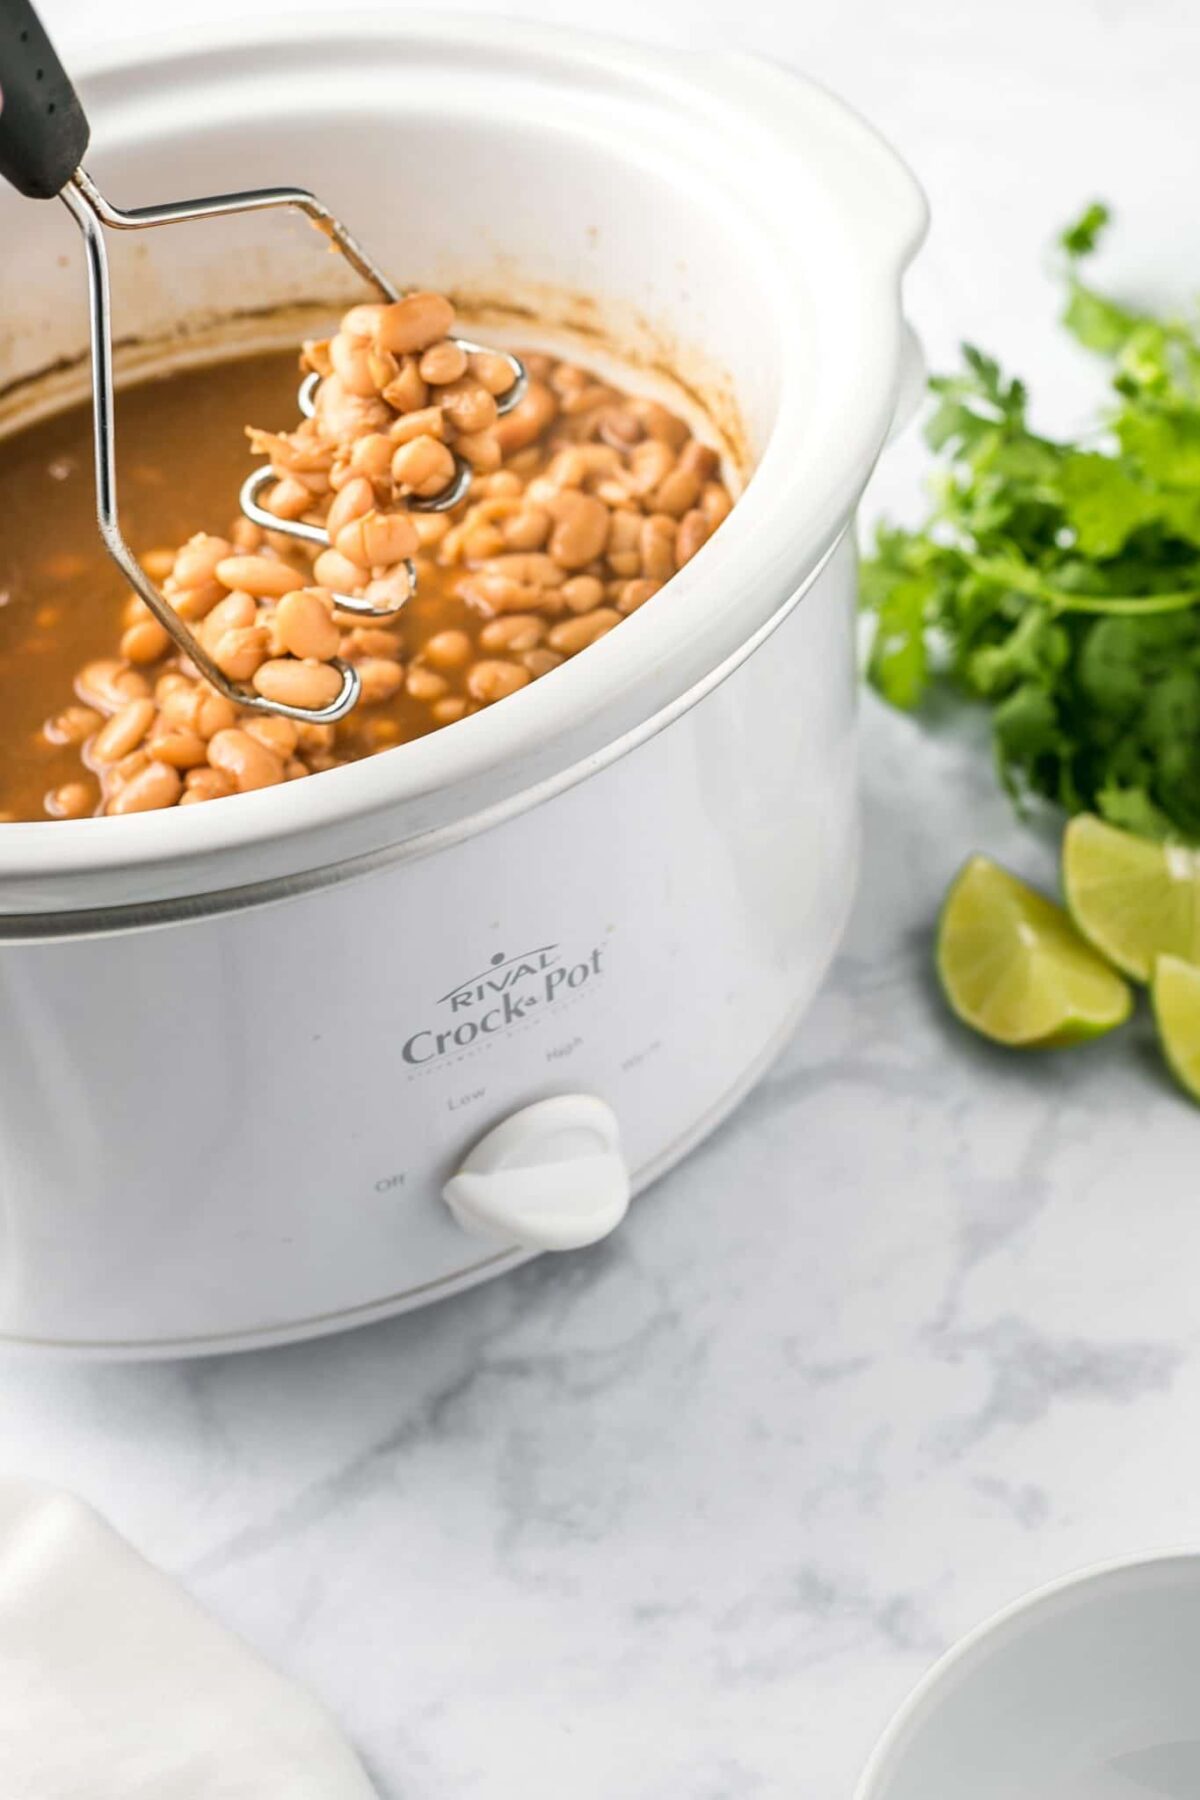 A crockpot with refried beans.